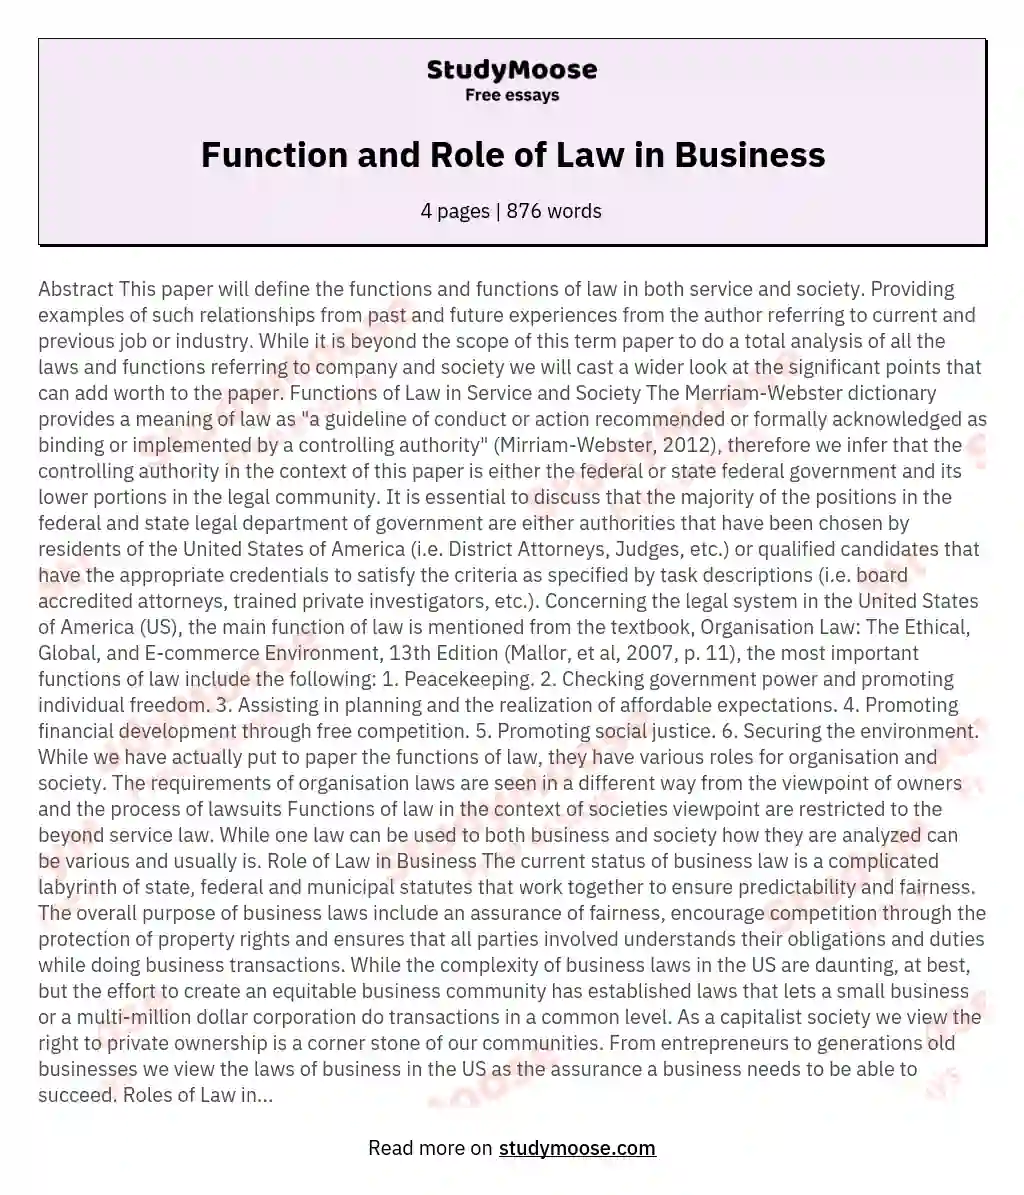 Function and Role of Law in Business